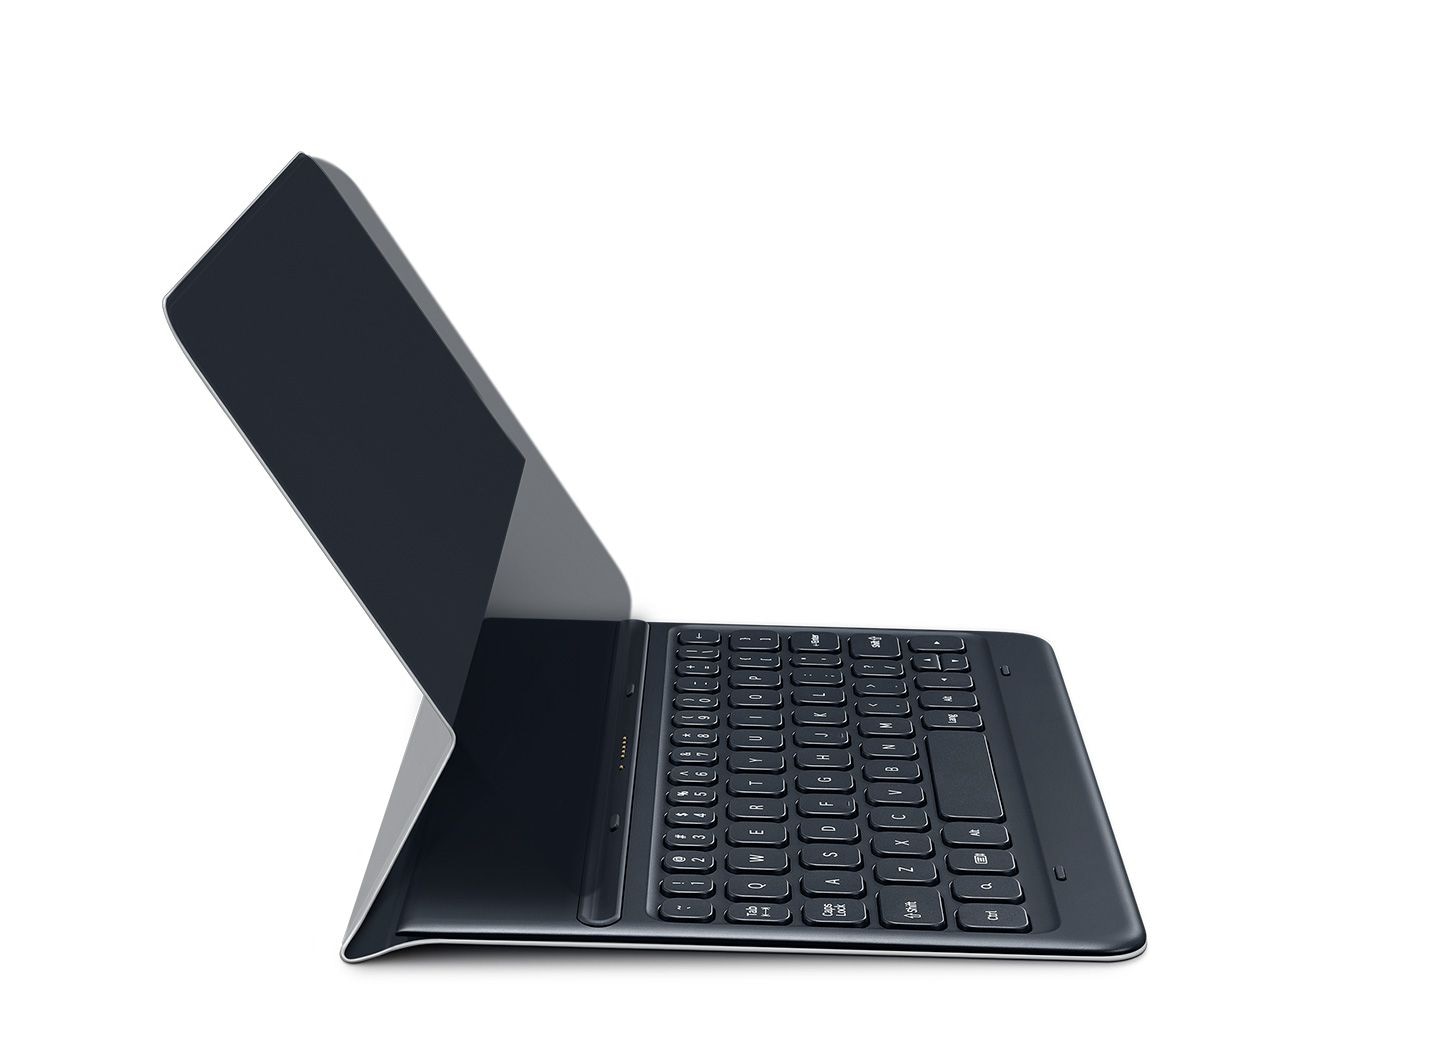 Illustrative image showing how Galaxy Tab S3 connects easily with the dedicated keyboard